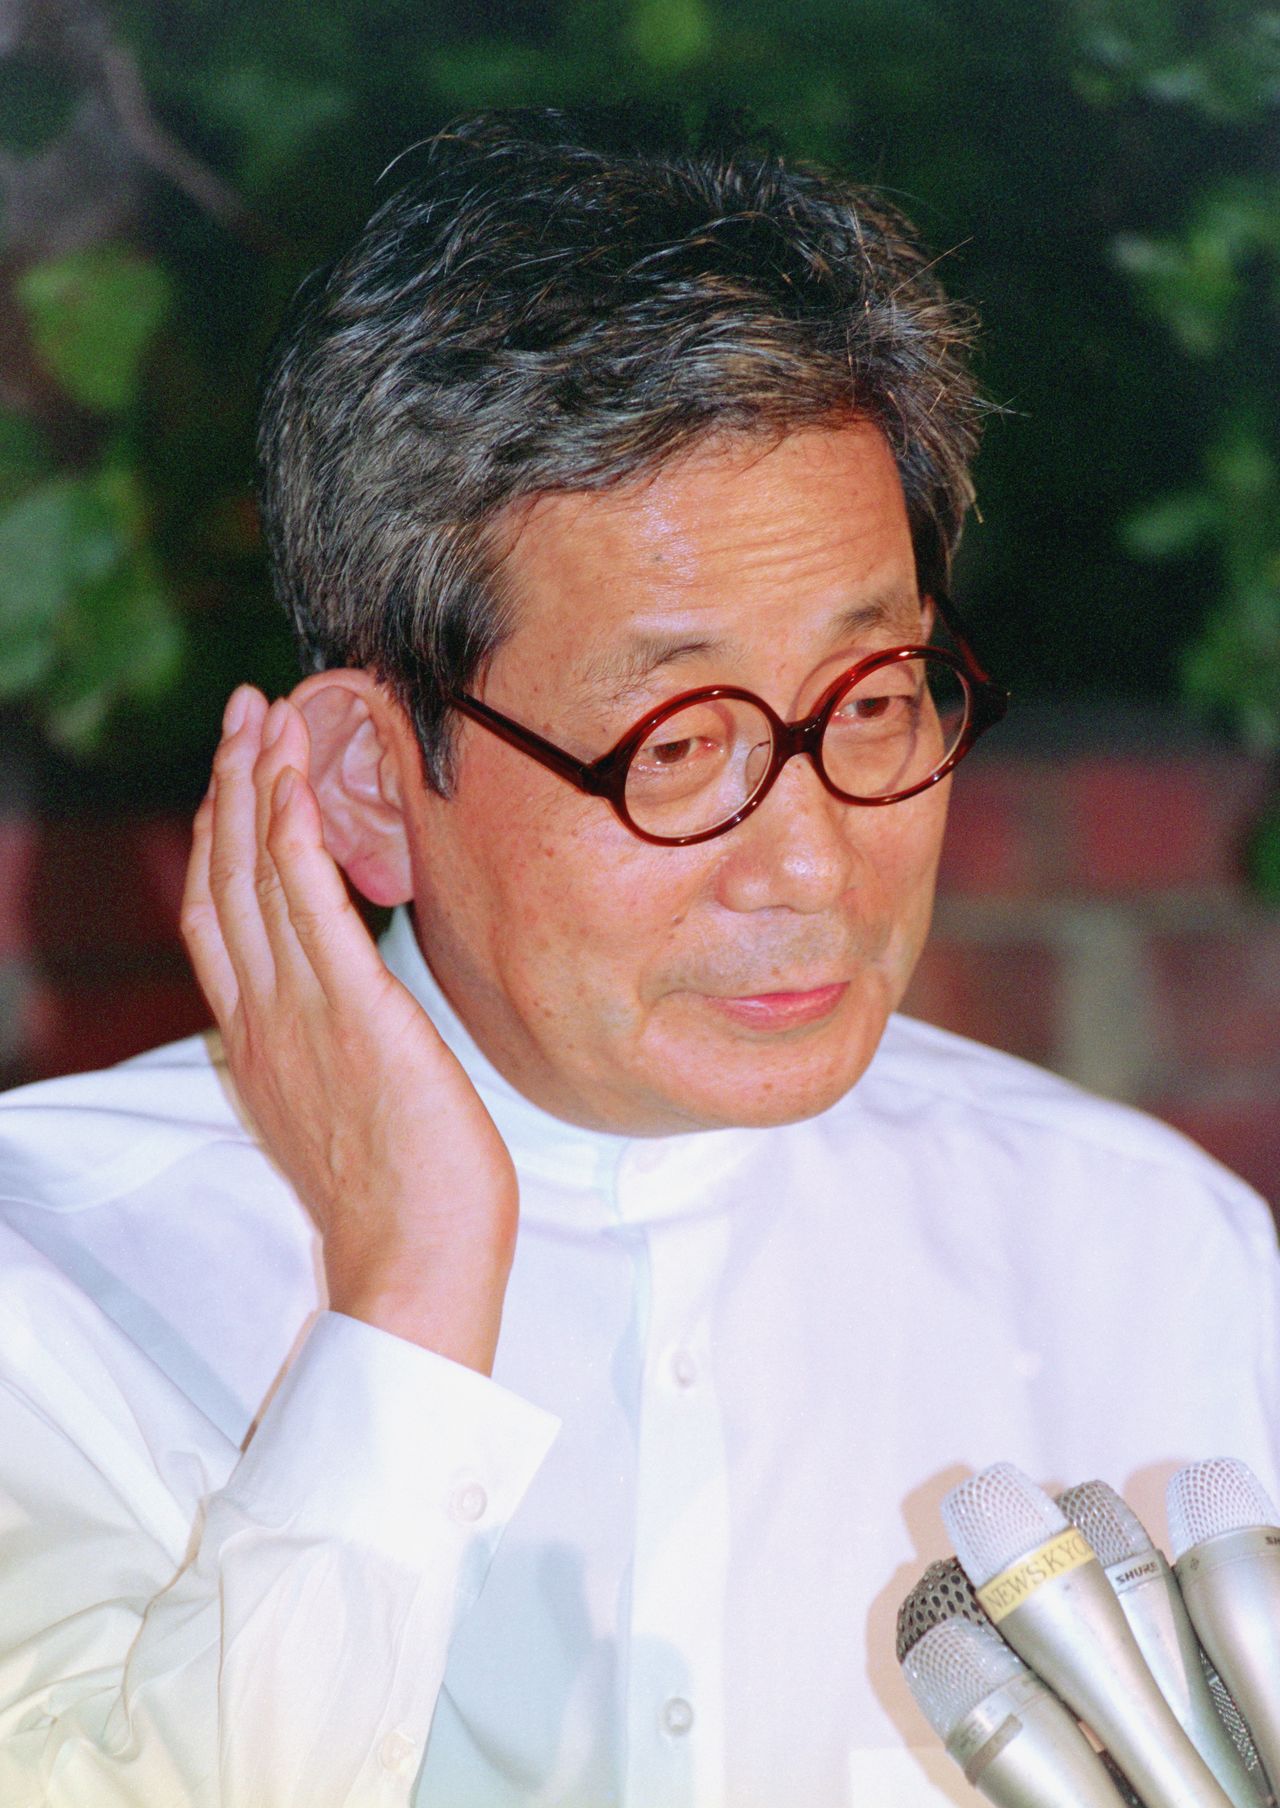 Ōe Kenzaburō speaks to the press in front of his home on October 13, 1994, following being awarded the Nobel Prize in Literature. (© Jiji)